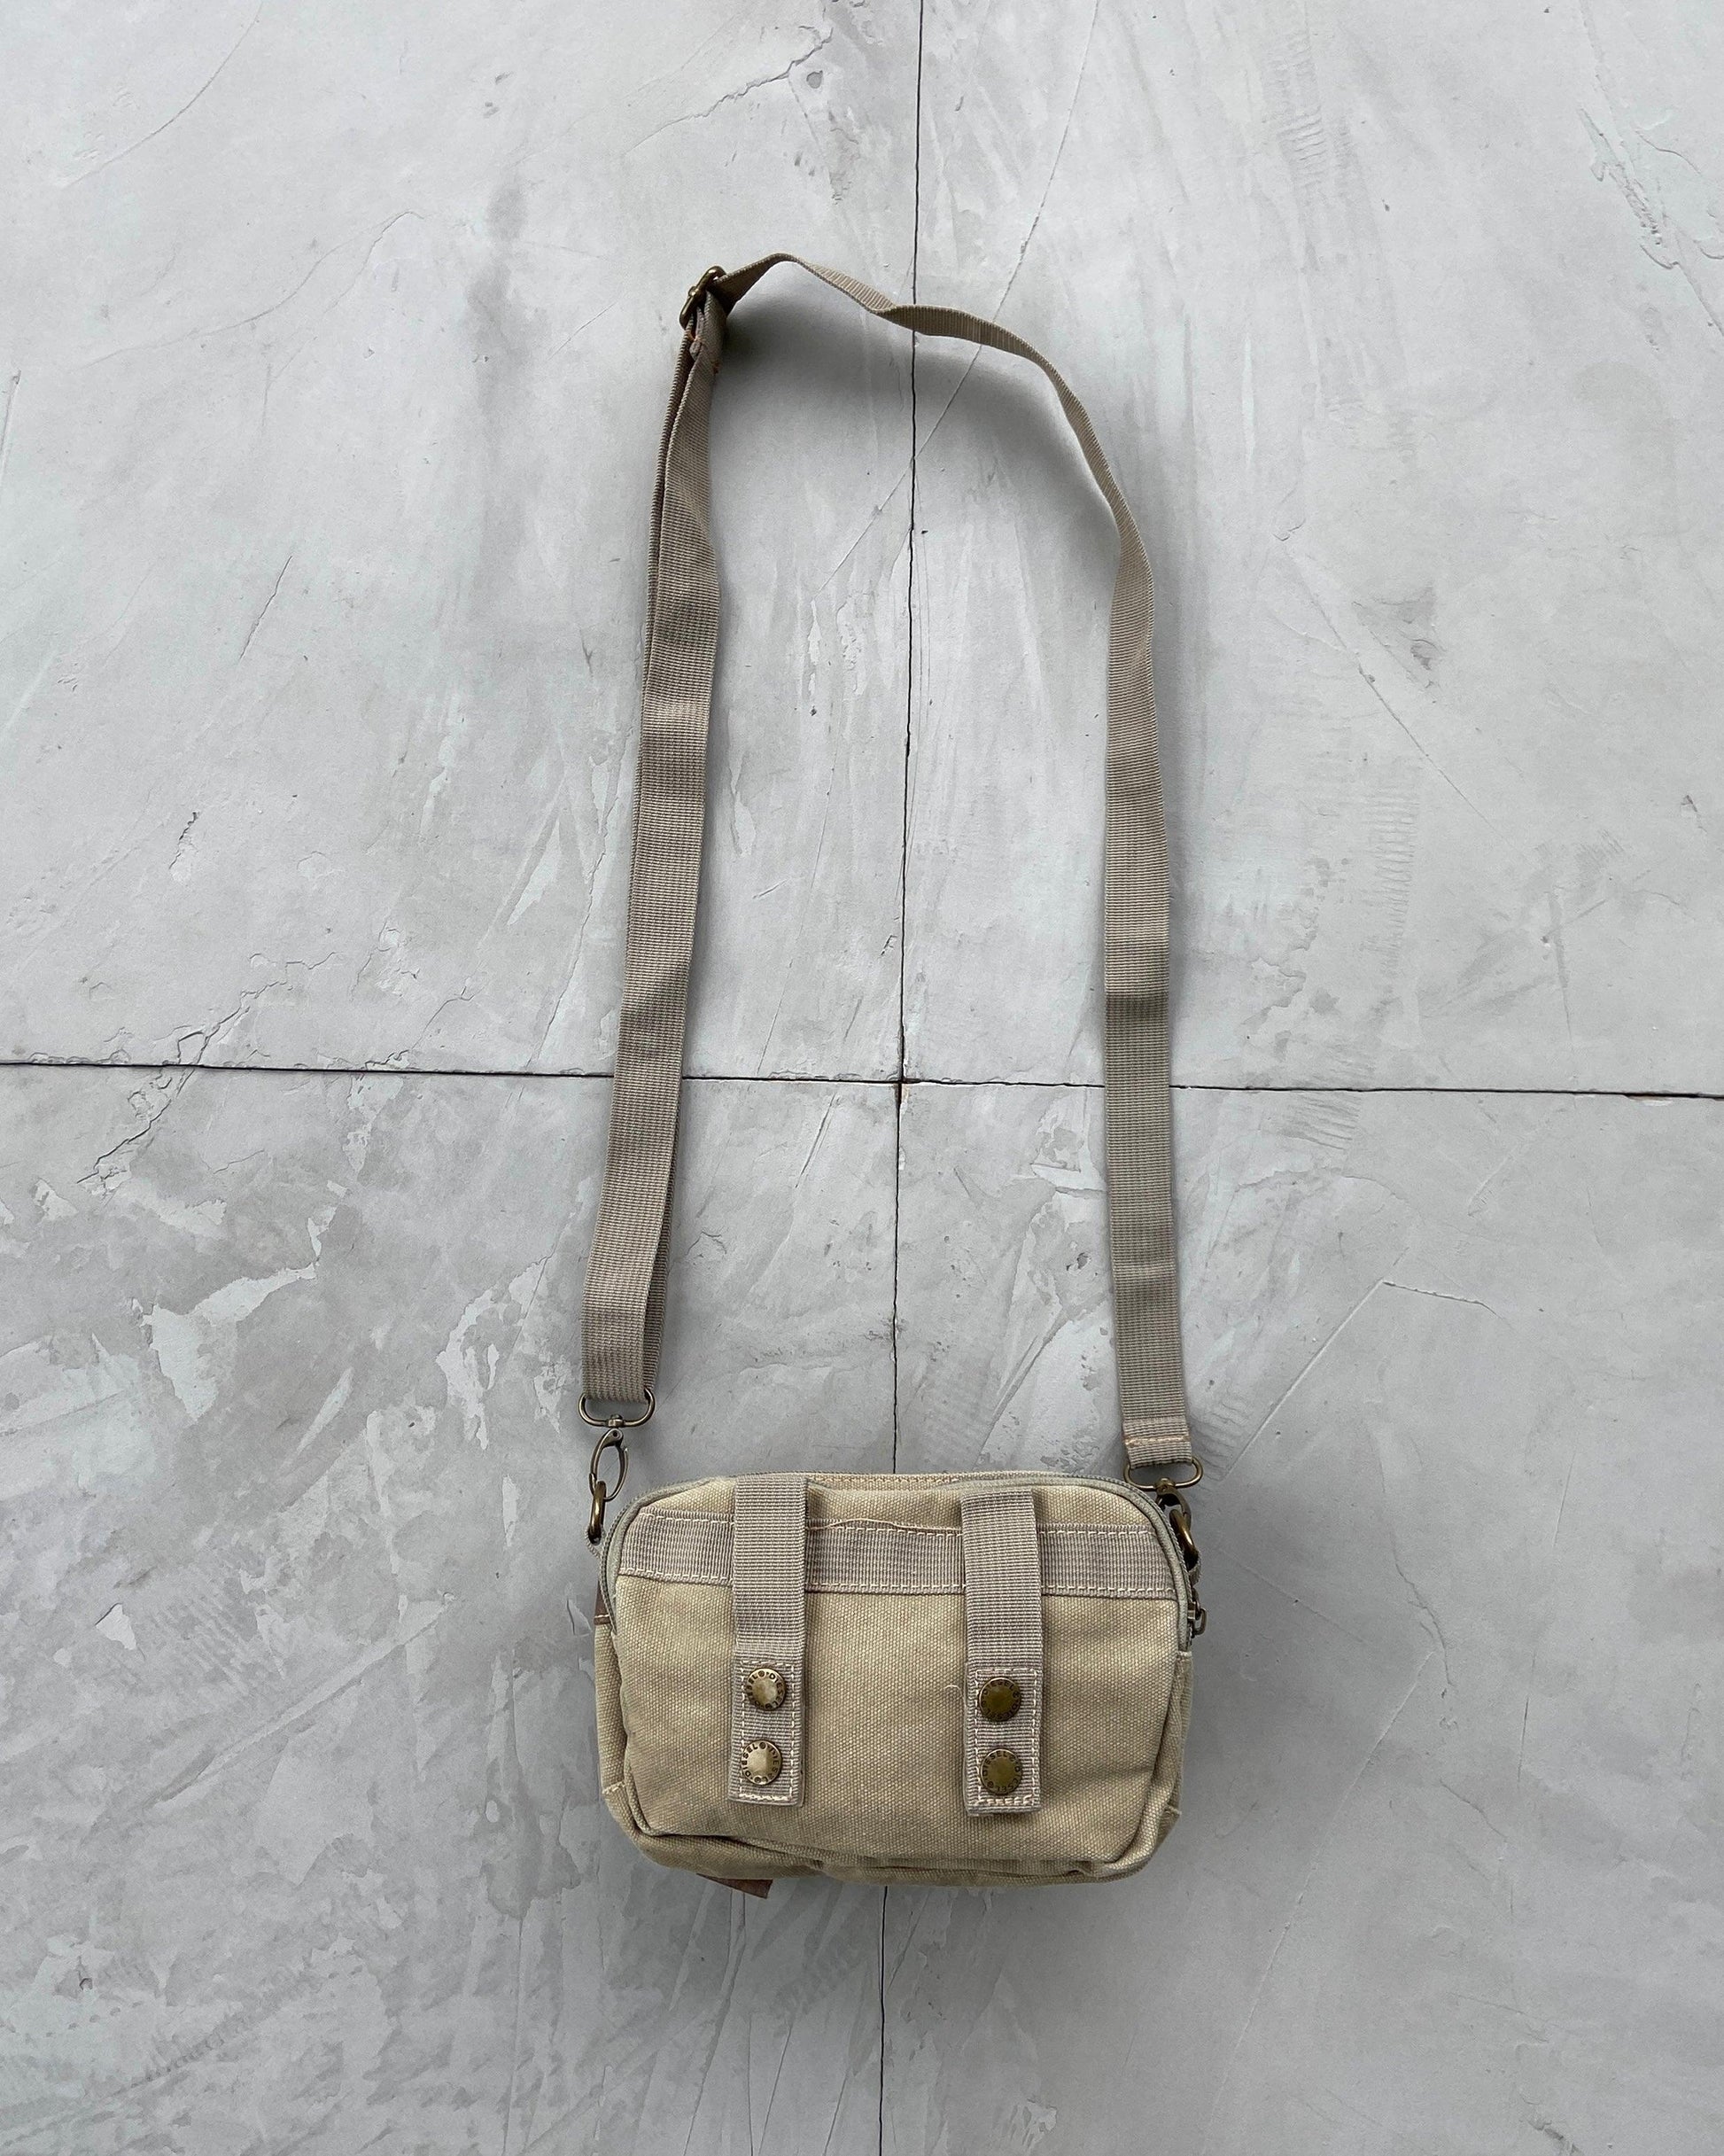 DIESEL 2000'S UTILITY CARGO SIDE BAG - Known Source